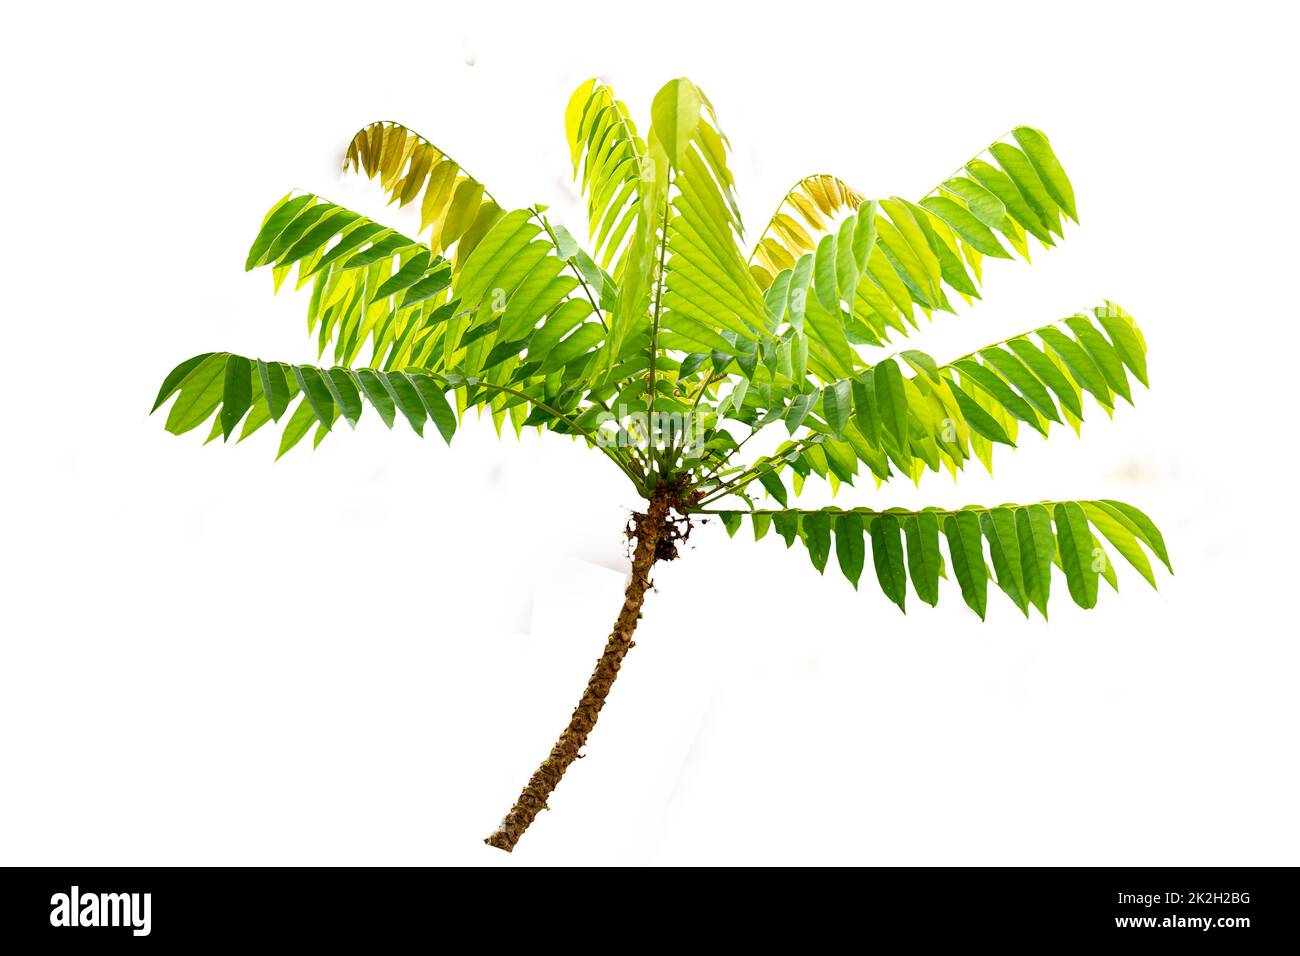 Averrhoa bilimbi tree branch complete with fresh green leaf stalks and shoots, isolated on a white background Stock Photo